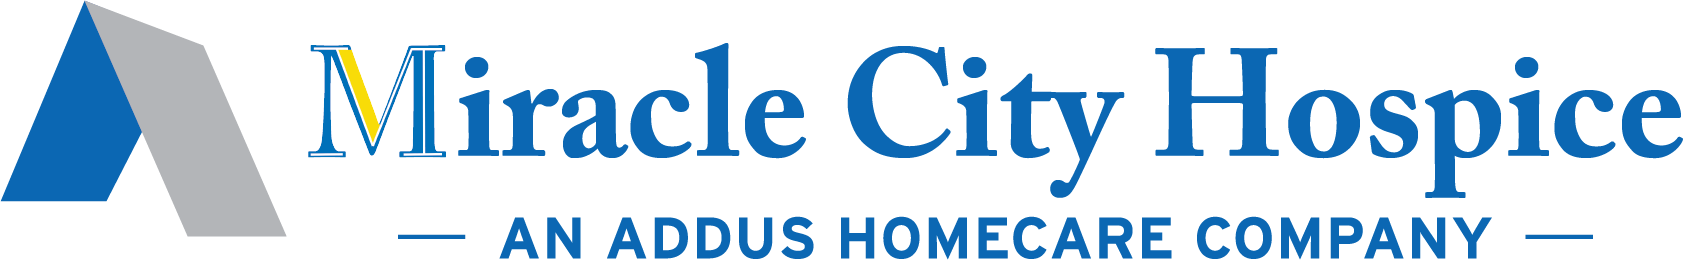 Miracle City Hospice